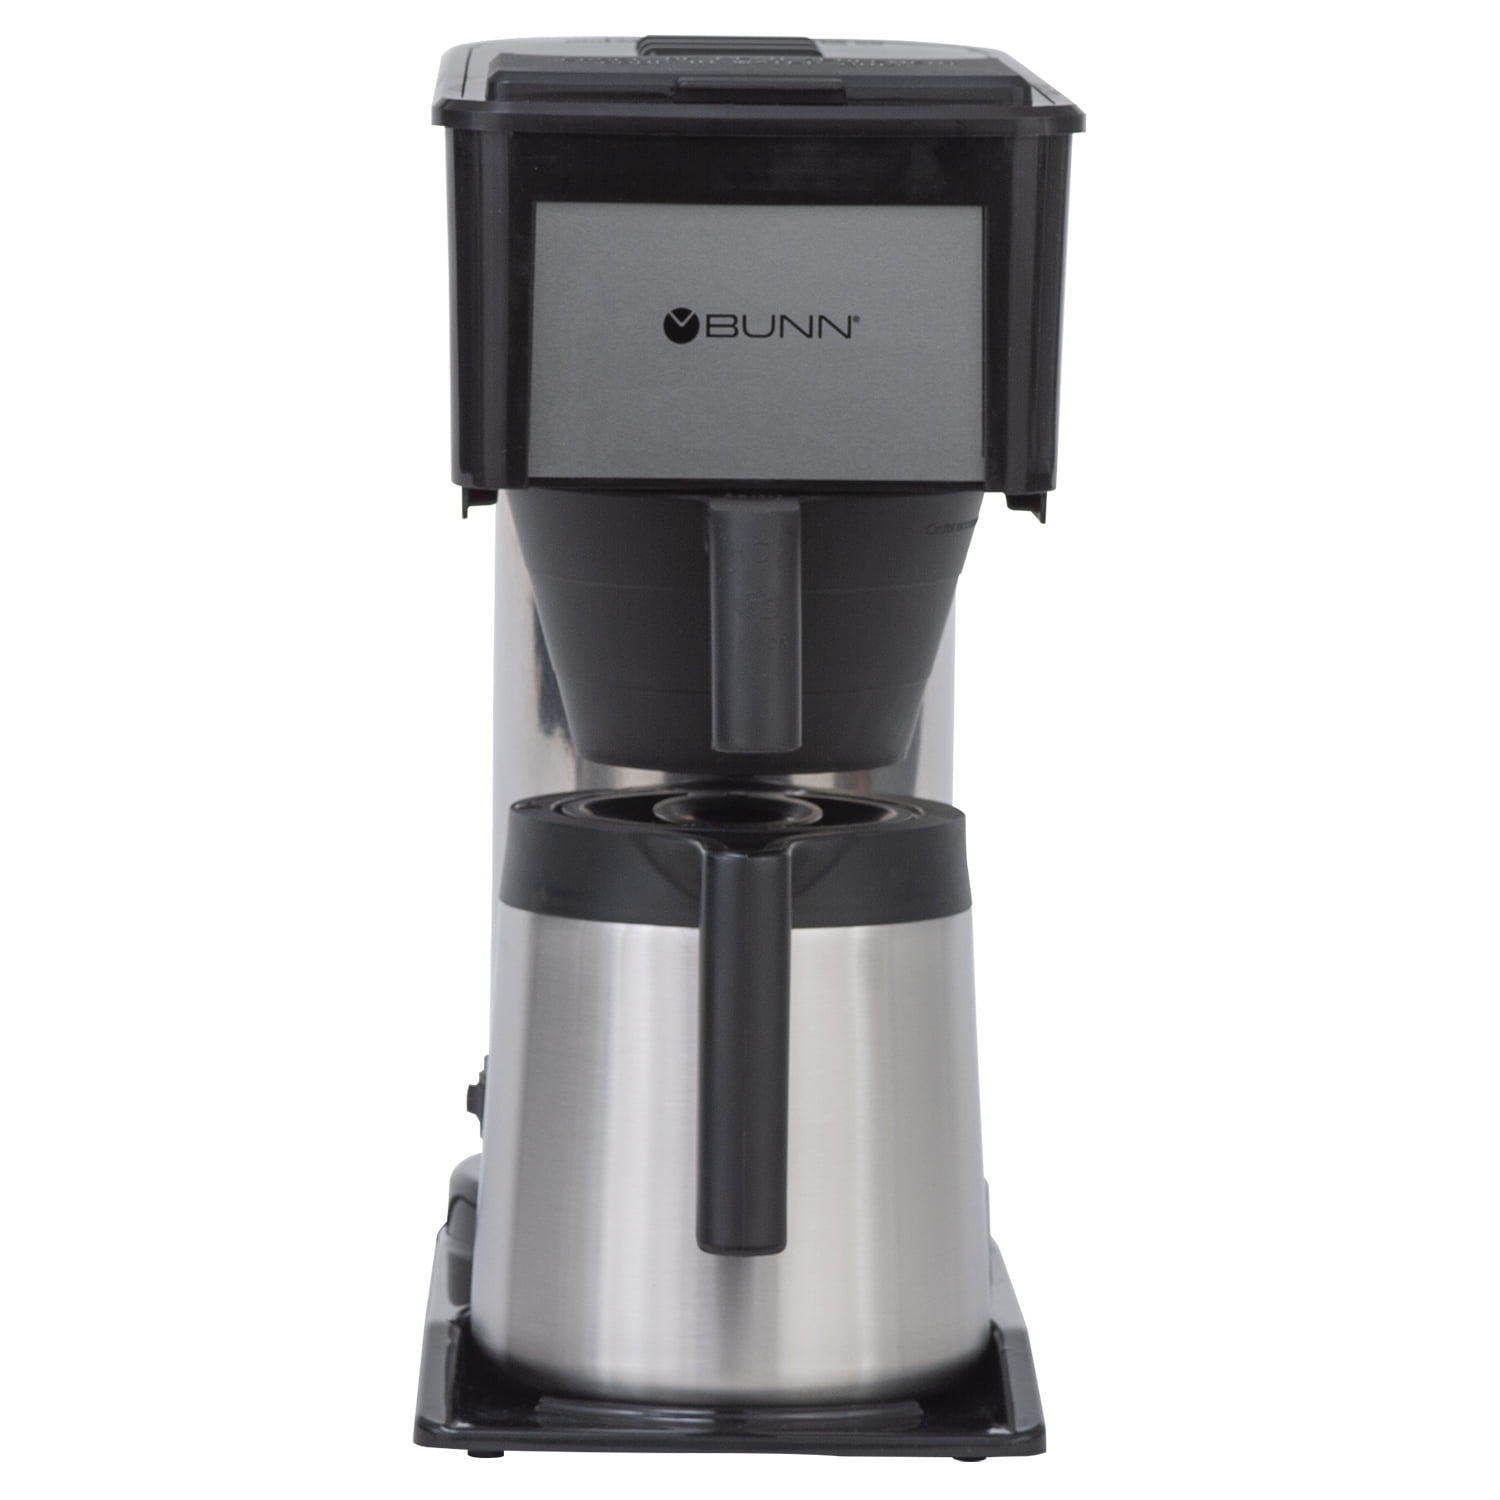 Bunn 55200 Csb3t Speed Brew Platinum Thermal Coffee Maker Stainless Steel, 10-Cup, Black